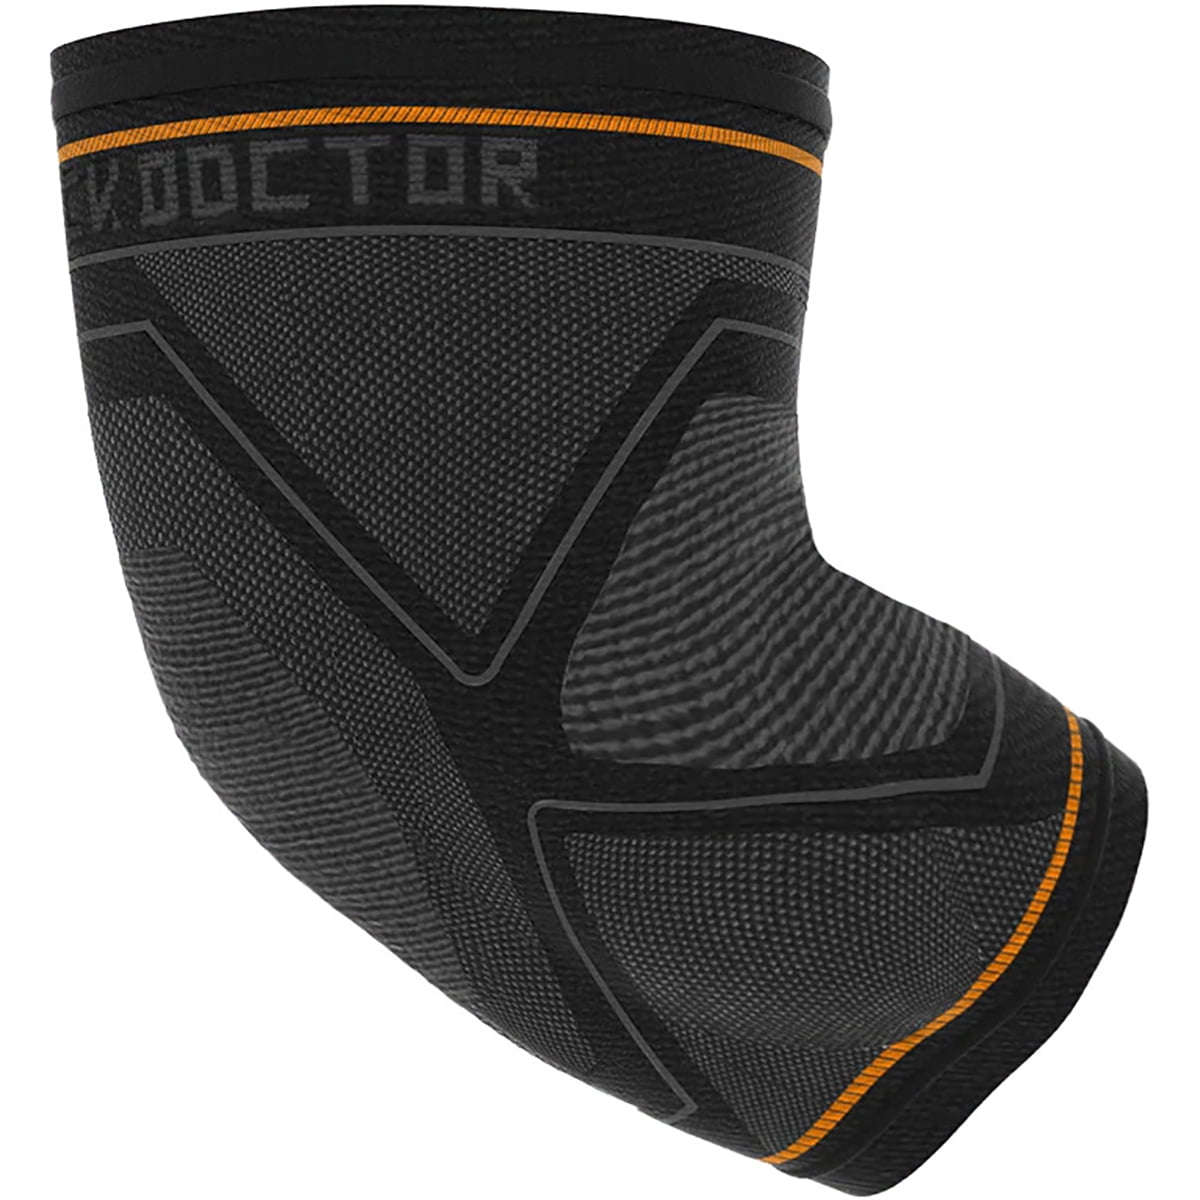 Details about   EVO SHIELD BLACK TRACER COMPRESSION SLEEVE SIZE ADULT LARGE CLOSEOUTSALE $12.99 